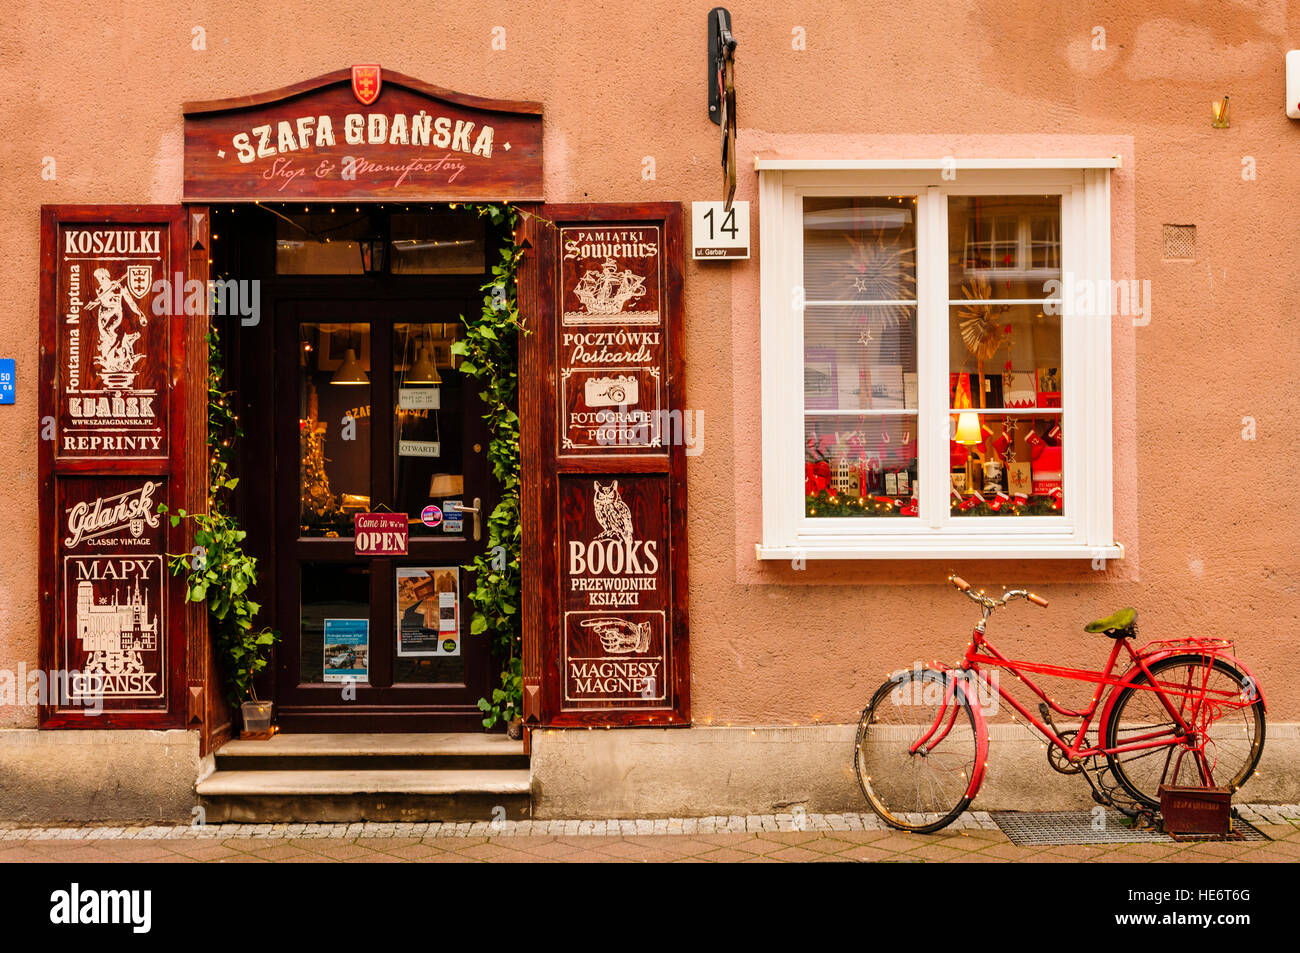 Red bicycle outside a book store in Gdansk, Poland Stock Photo